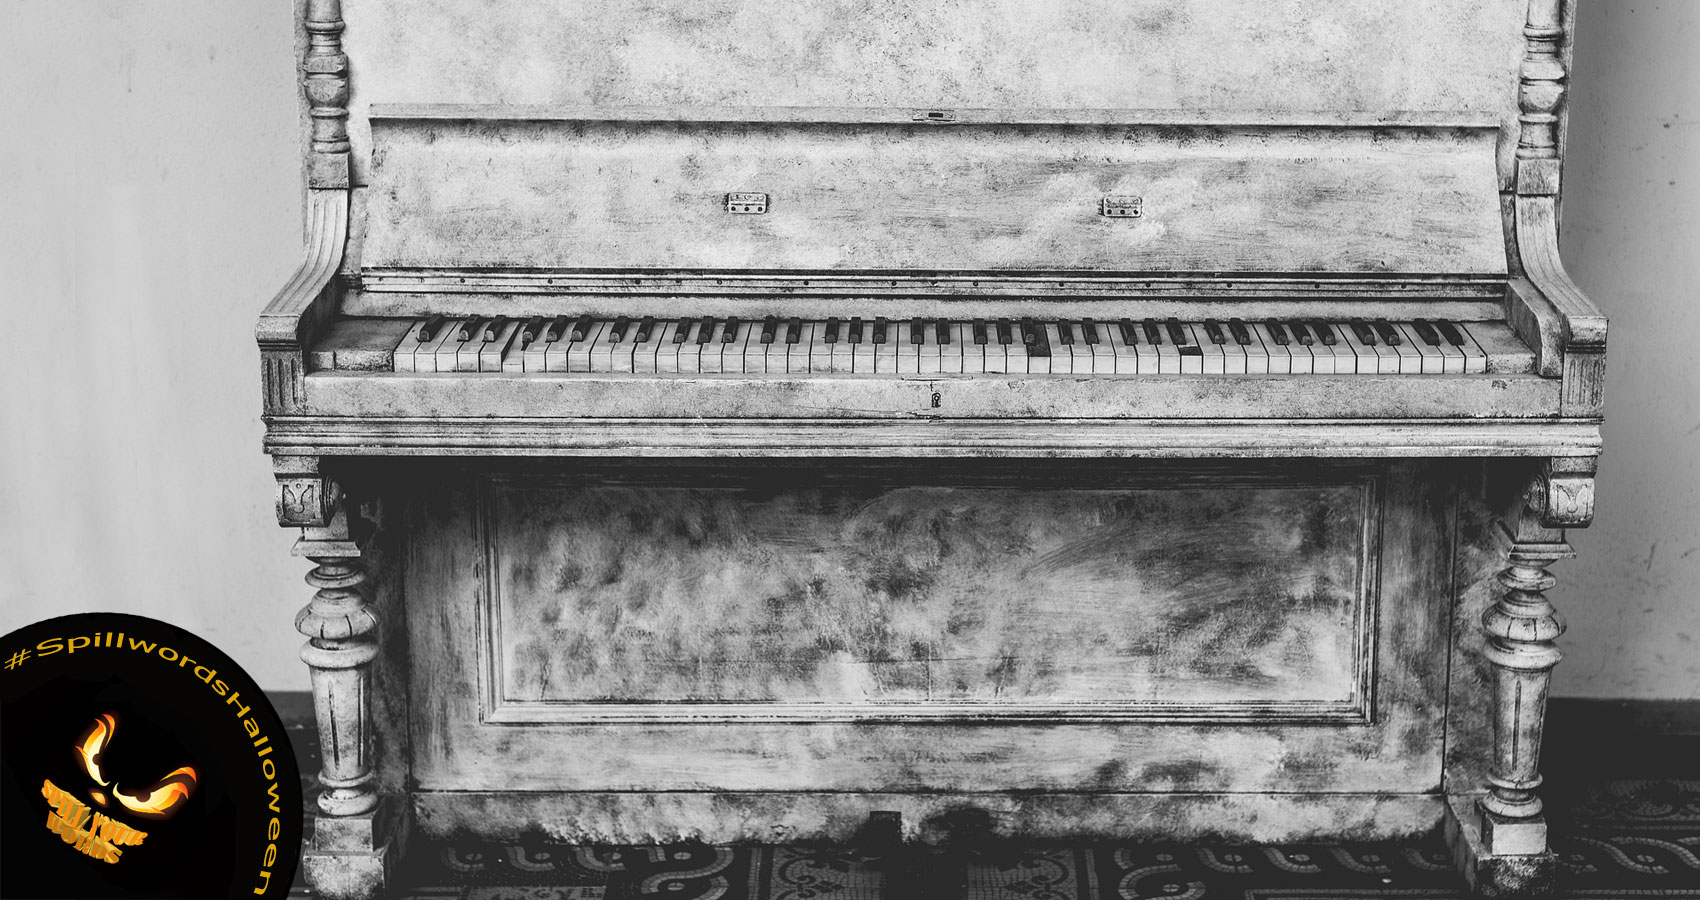 The Thing At The Piano written by Daniel S. Liuzzi at Spillwords.com